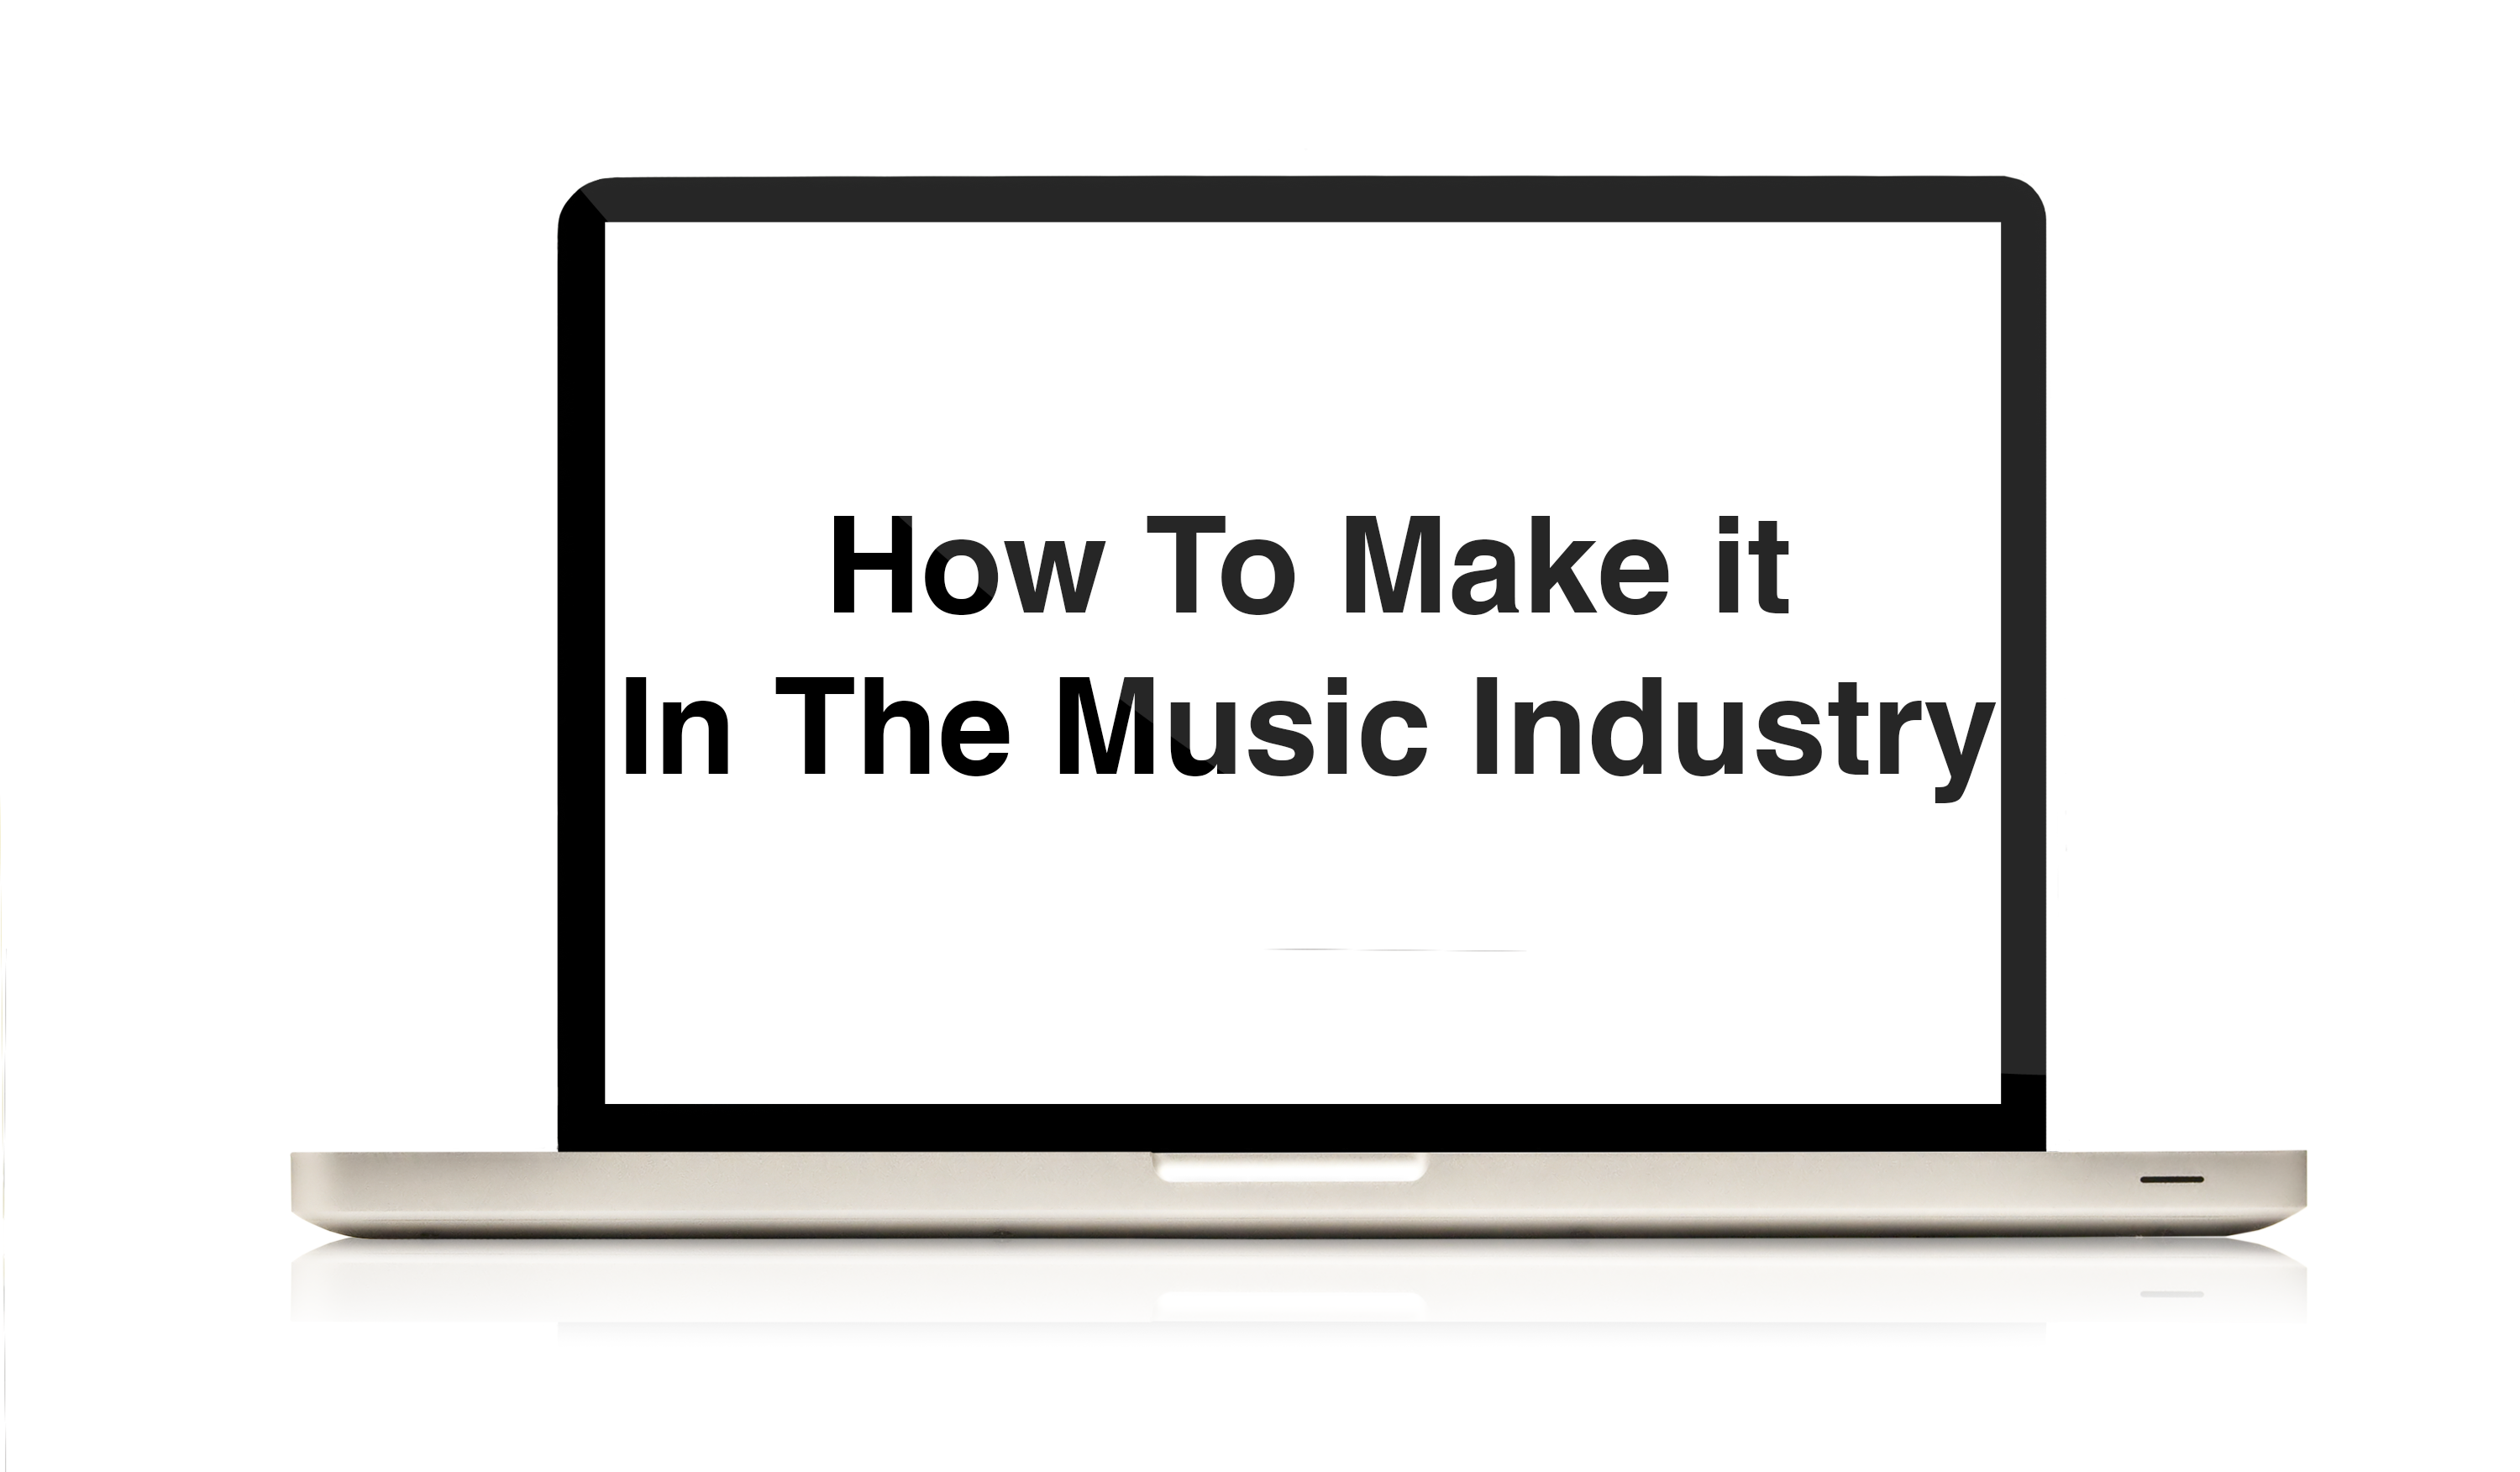 How To Make It In The Music Industry